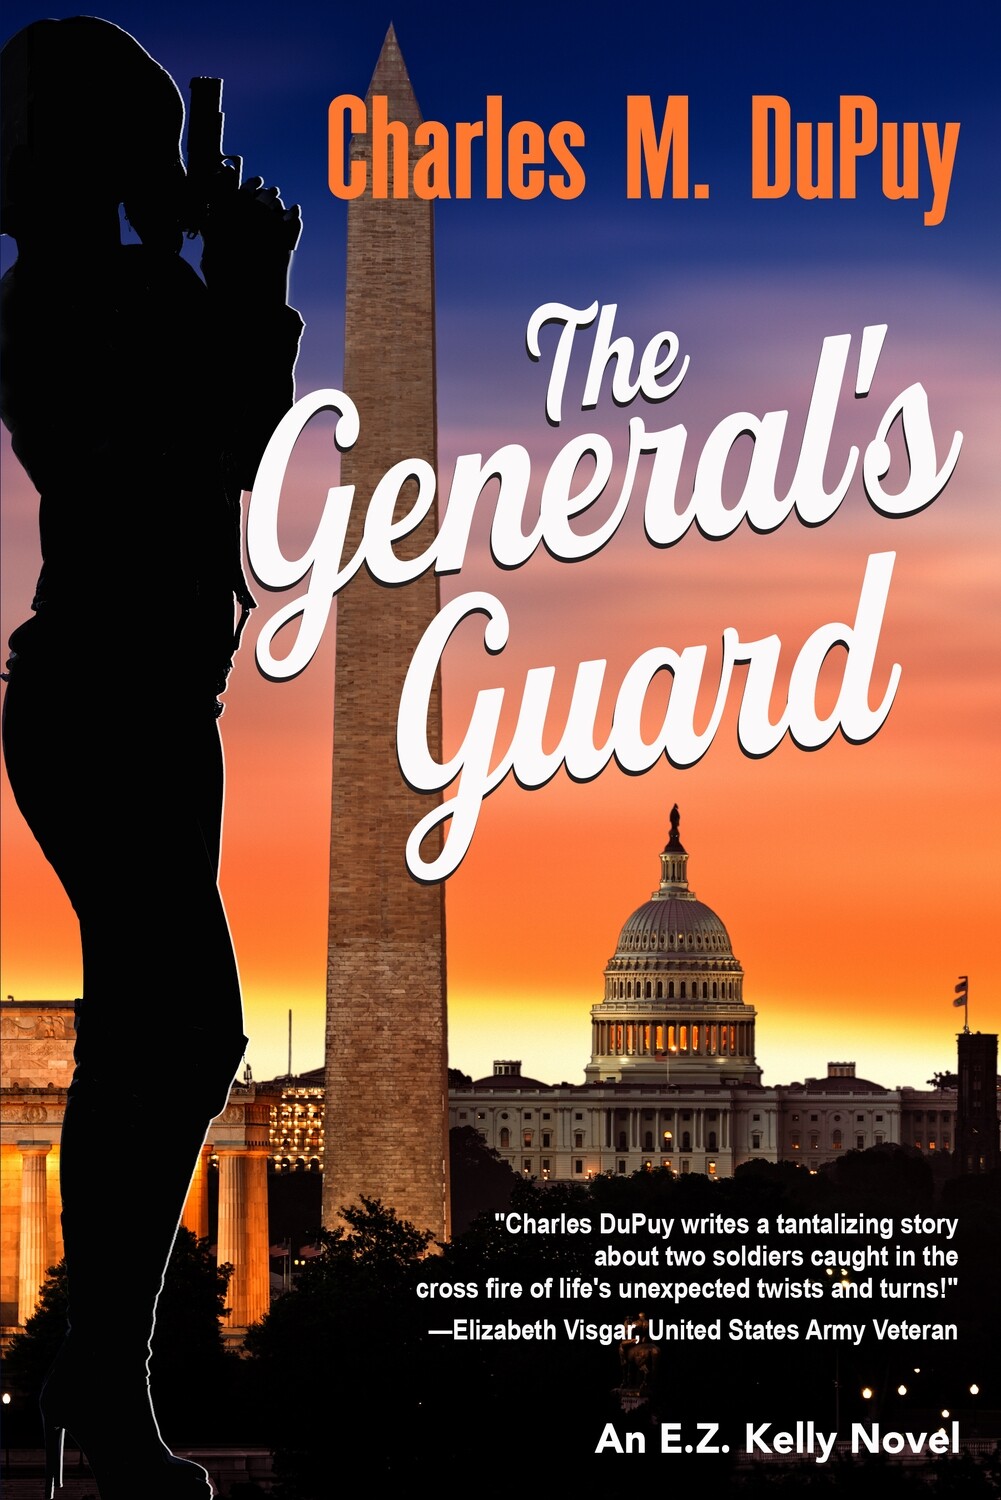 The General's Guard by Charles M. DuPuy